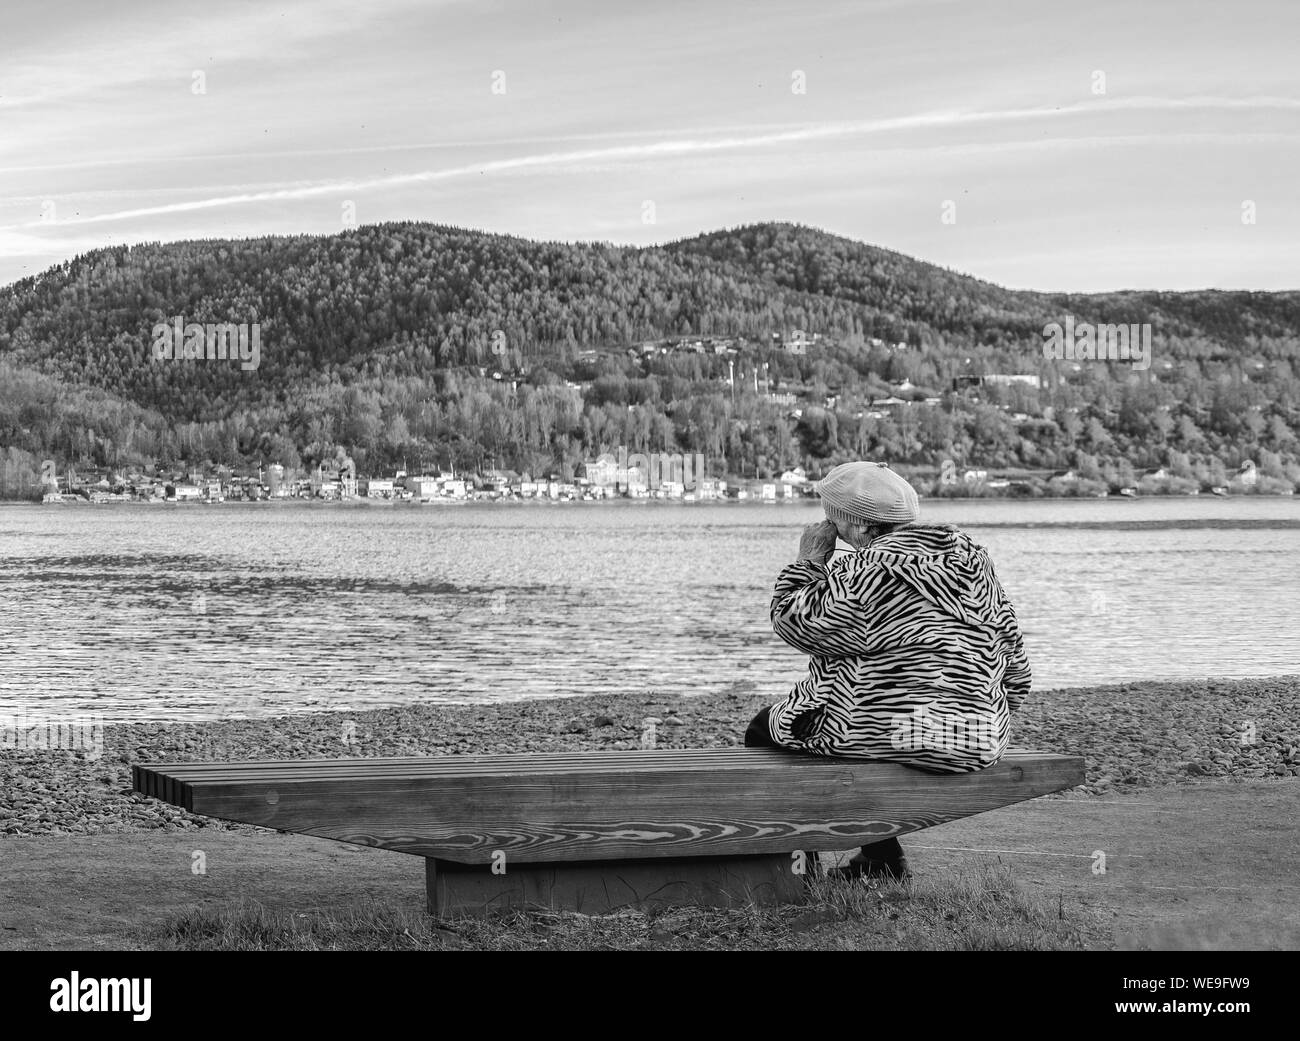 Krasnoyarsk, Russia, July 29, 2019: the old grandmother is sad and crying on the Bank of a beautiful river. black and white dramatic photo. Stock Photo